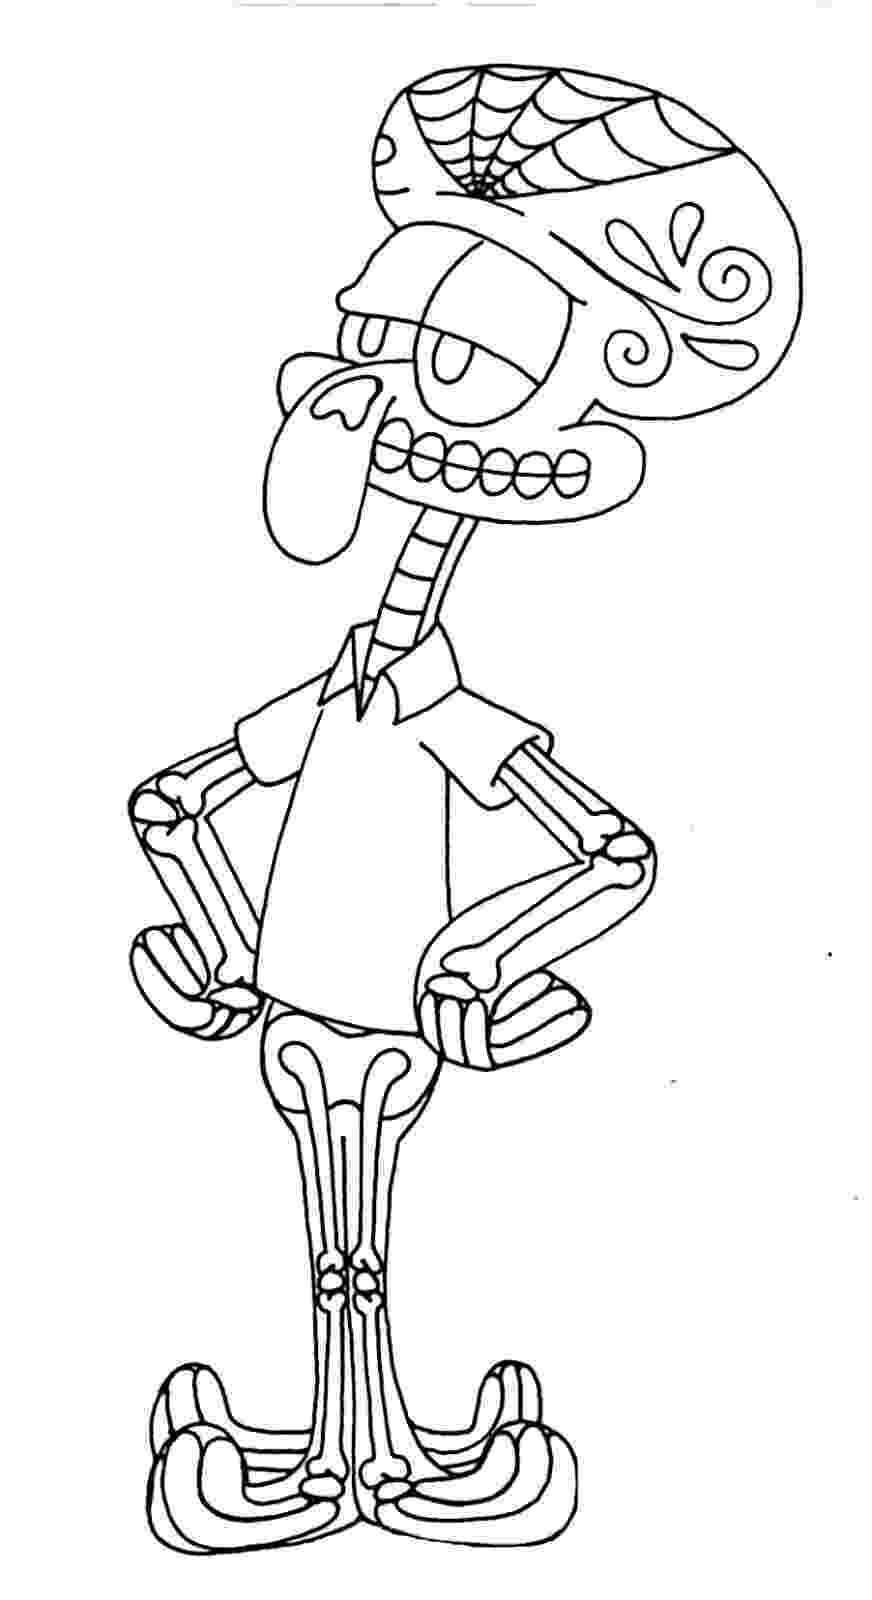 squidward coloring pages yucca flats nm wenchkin39s coloring pages skele squidward squidward coloring pages 